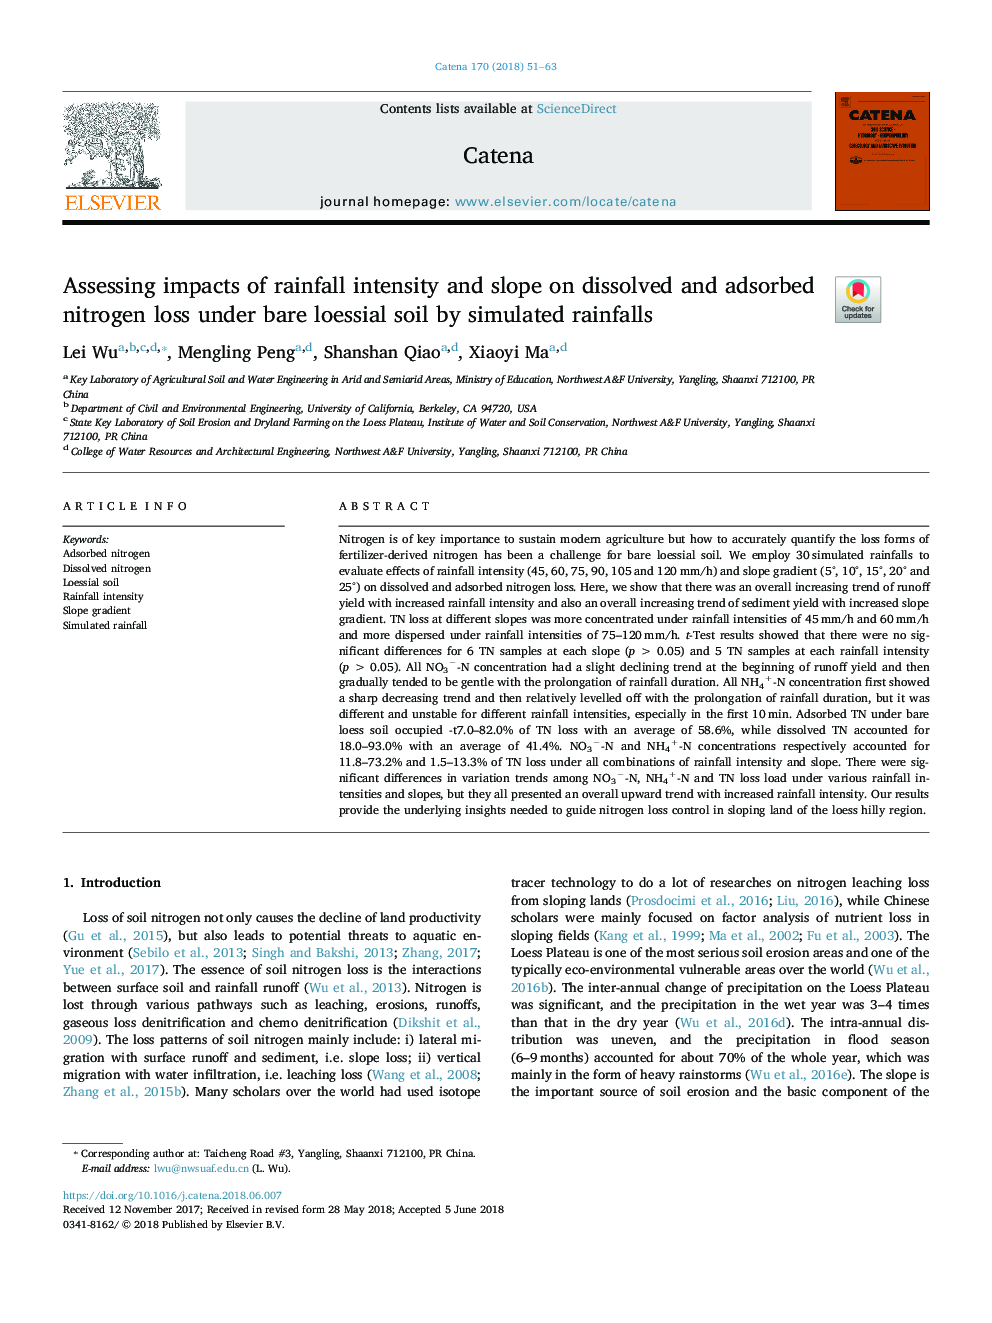 Assessing impacts of rainfall intensity and slope on dissolved and adsorbed nitrogen loss under bare loessial soil by simulated rainfalls